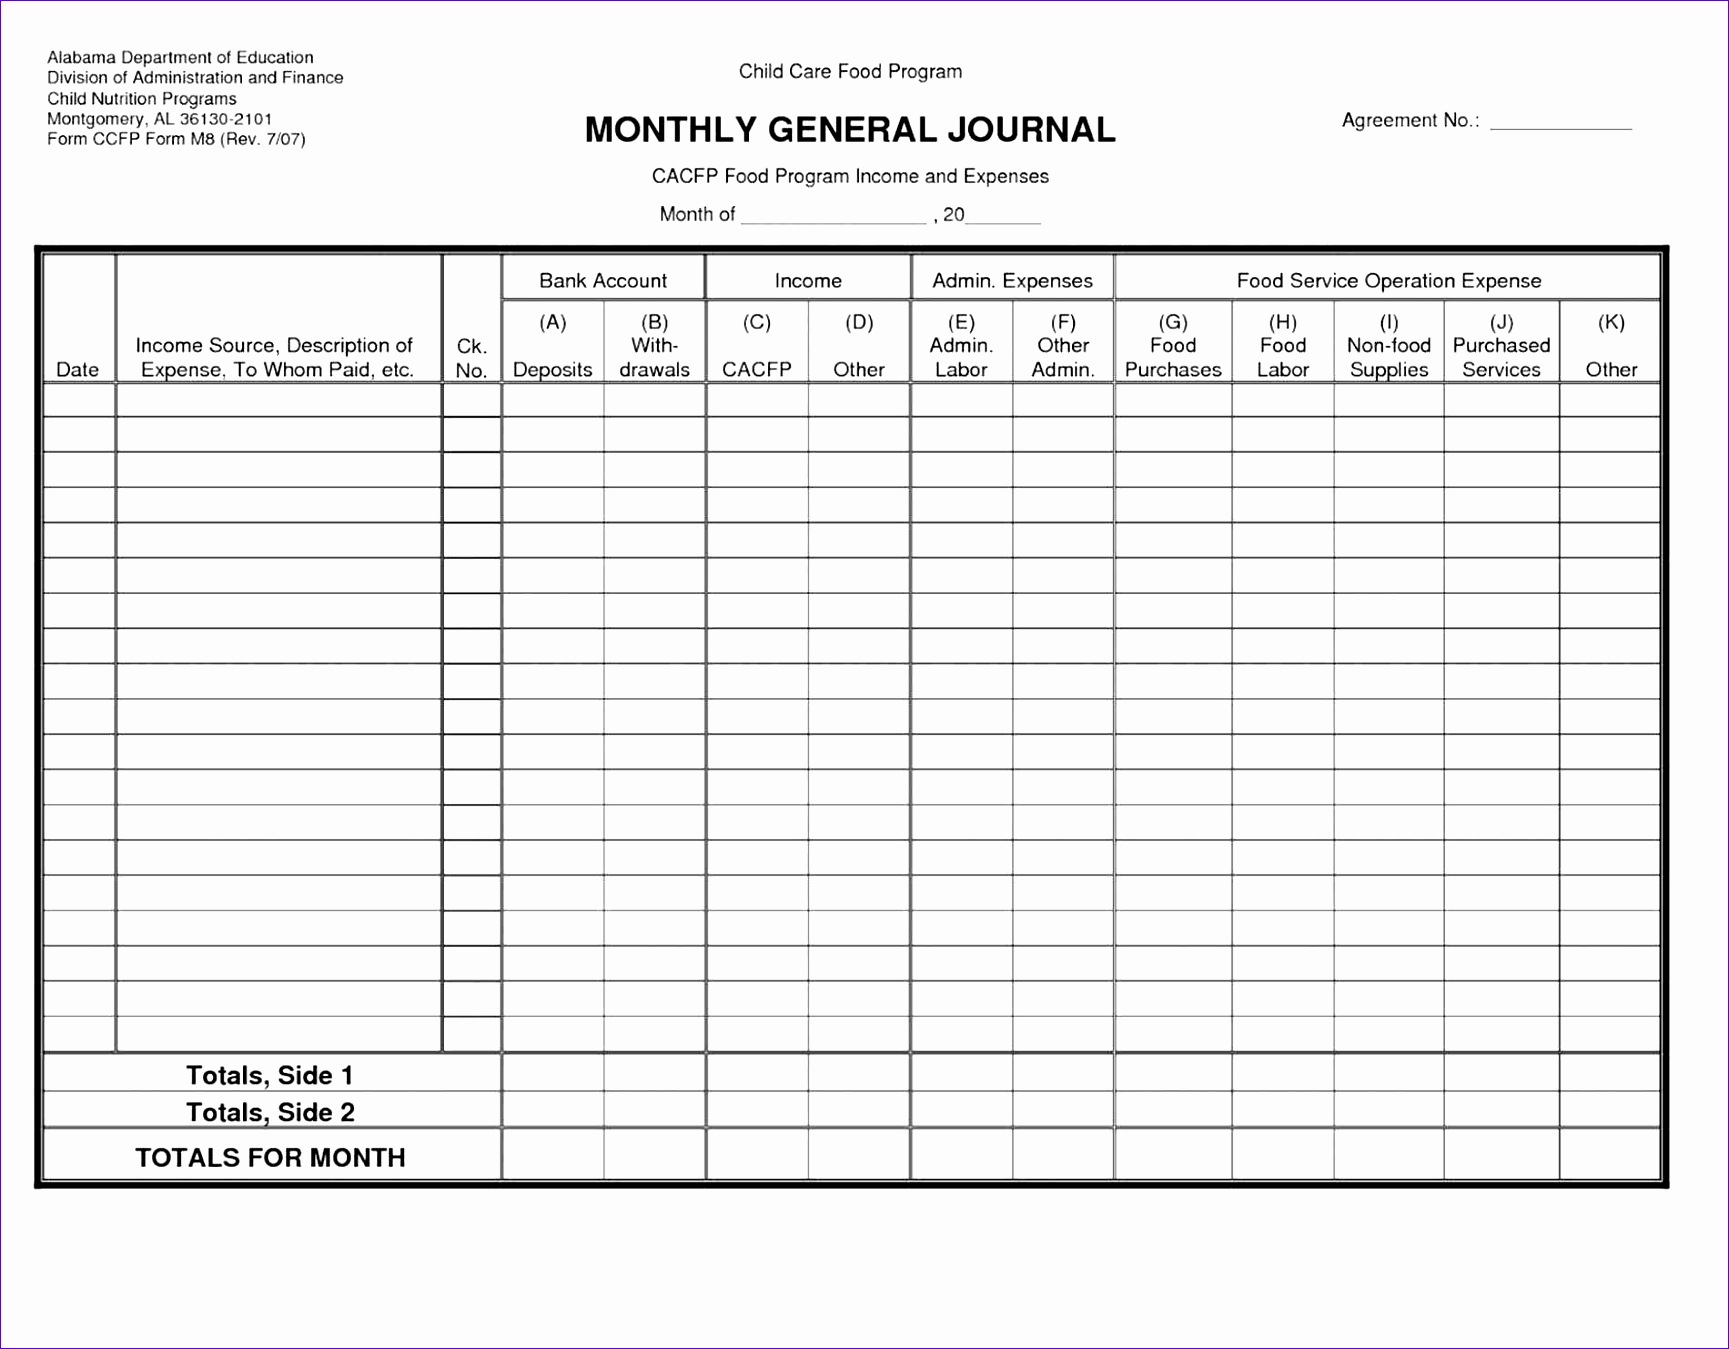 throughout xl sheet microsoft Microsoft Excel Template Download excel spreadsheet spreadsheets throughout xl sheet templates for accounting small business asepag excel Microsoft